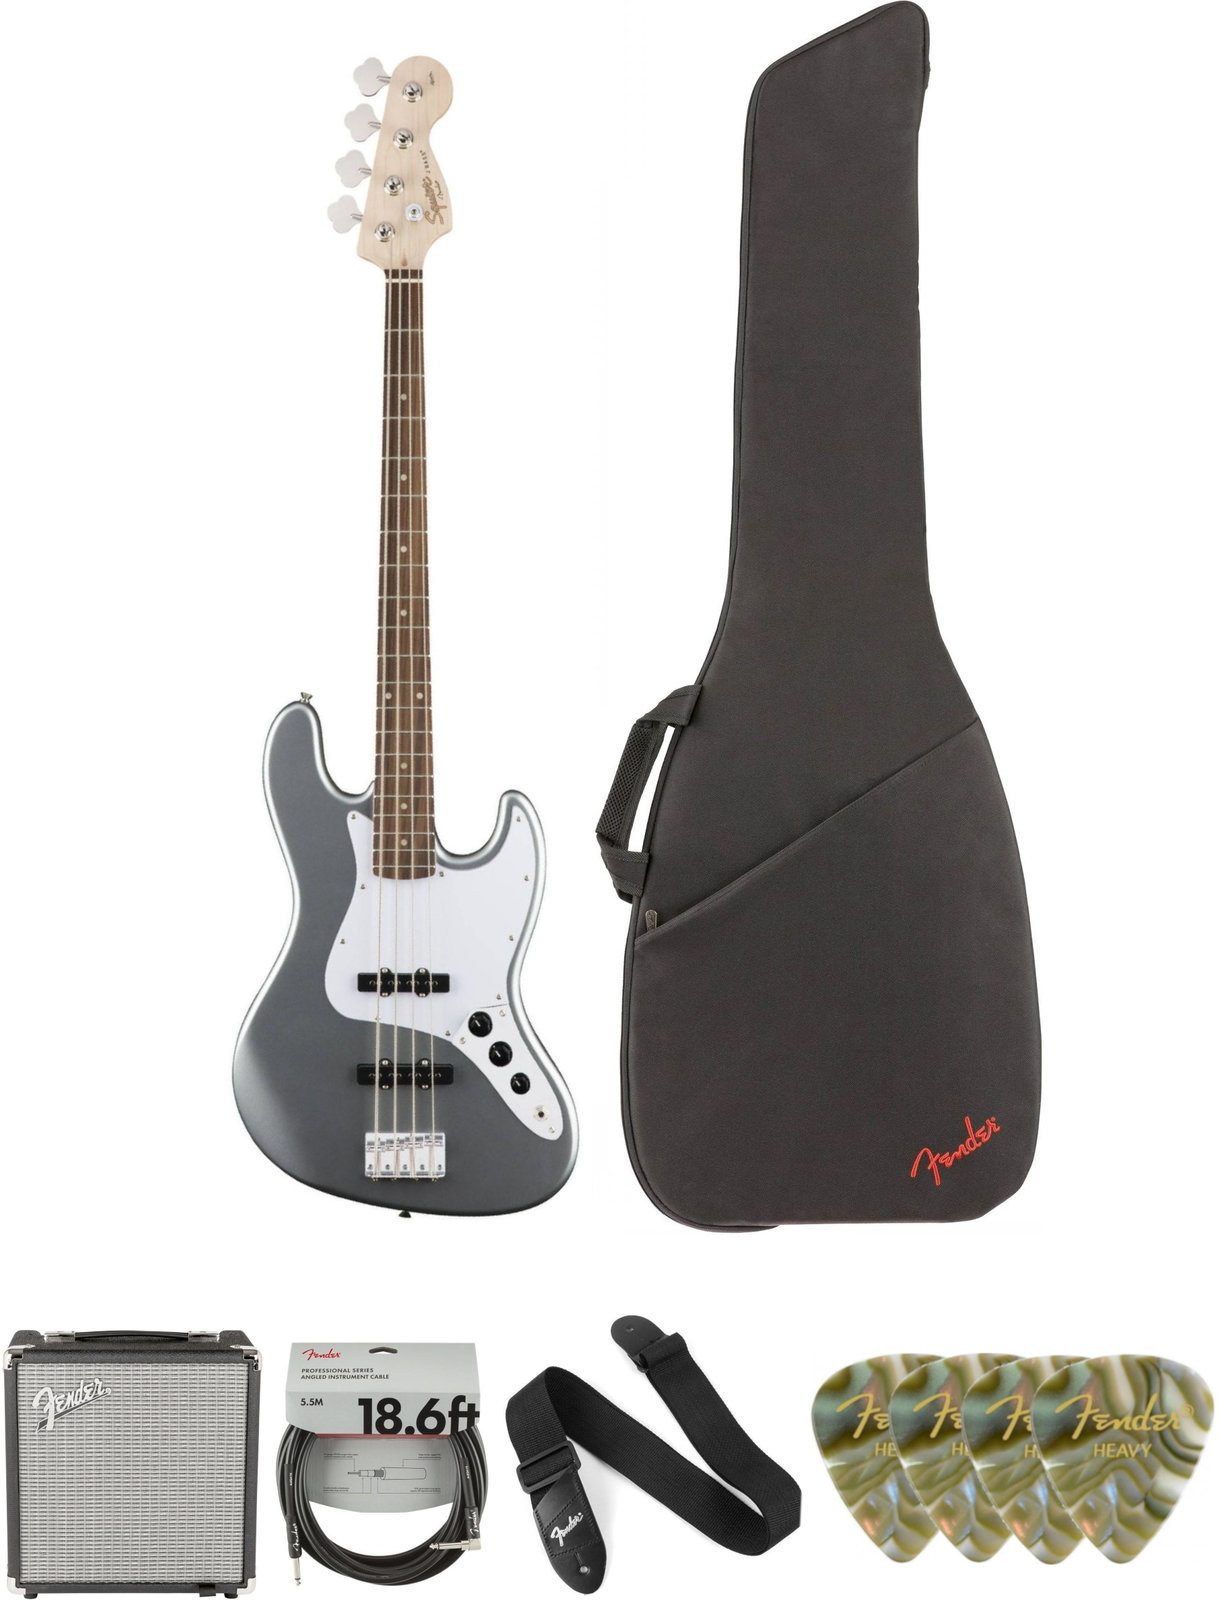 E-Bass Fender Squier Affinity Series Jazz Bass LR Slick Silver Deluxe SET Slick Silver